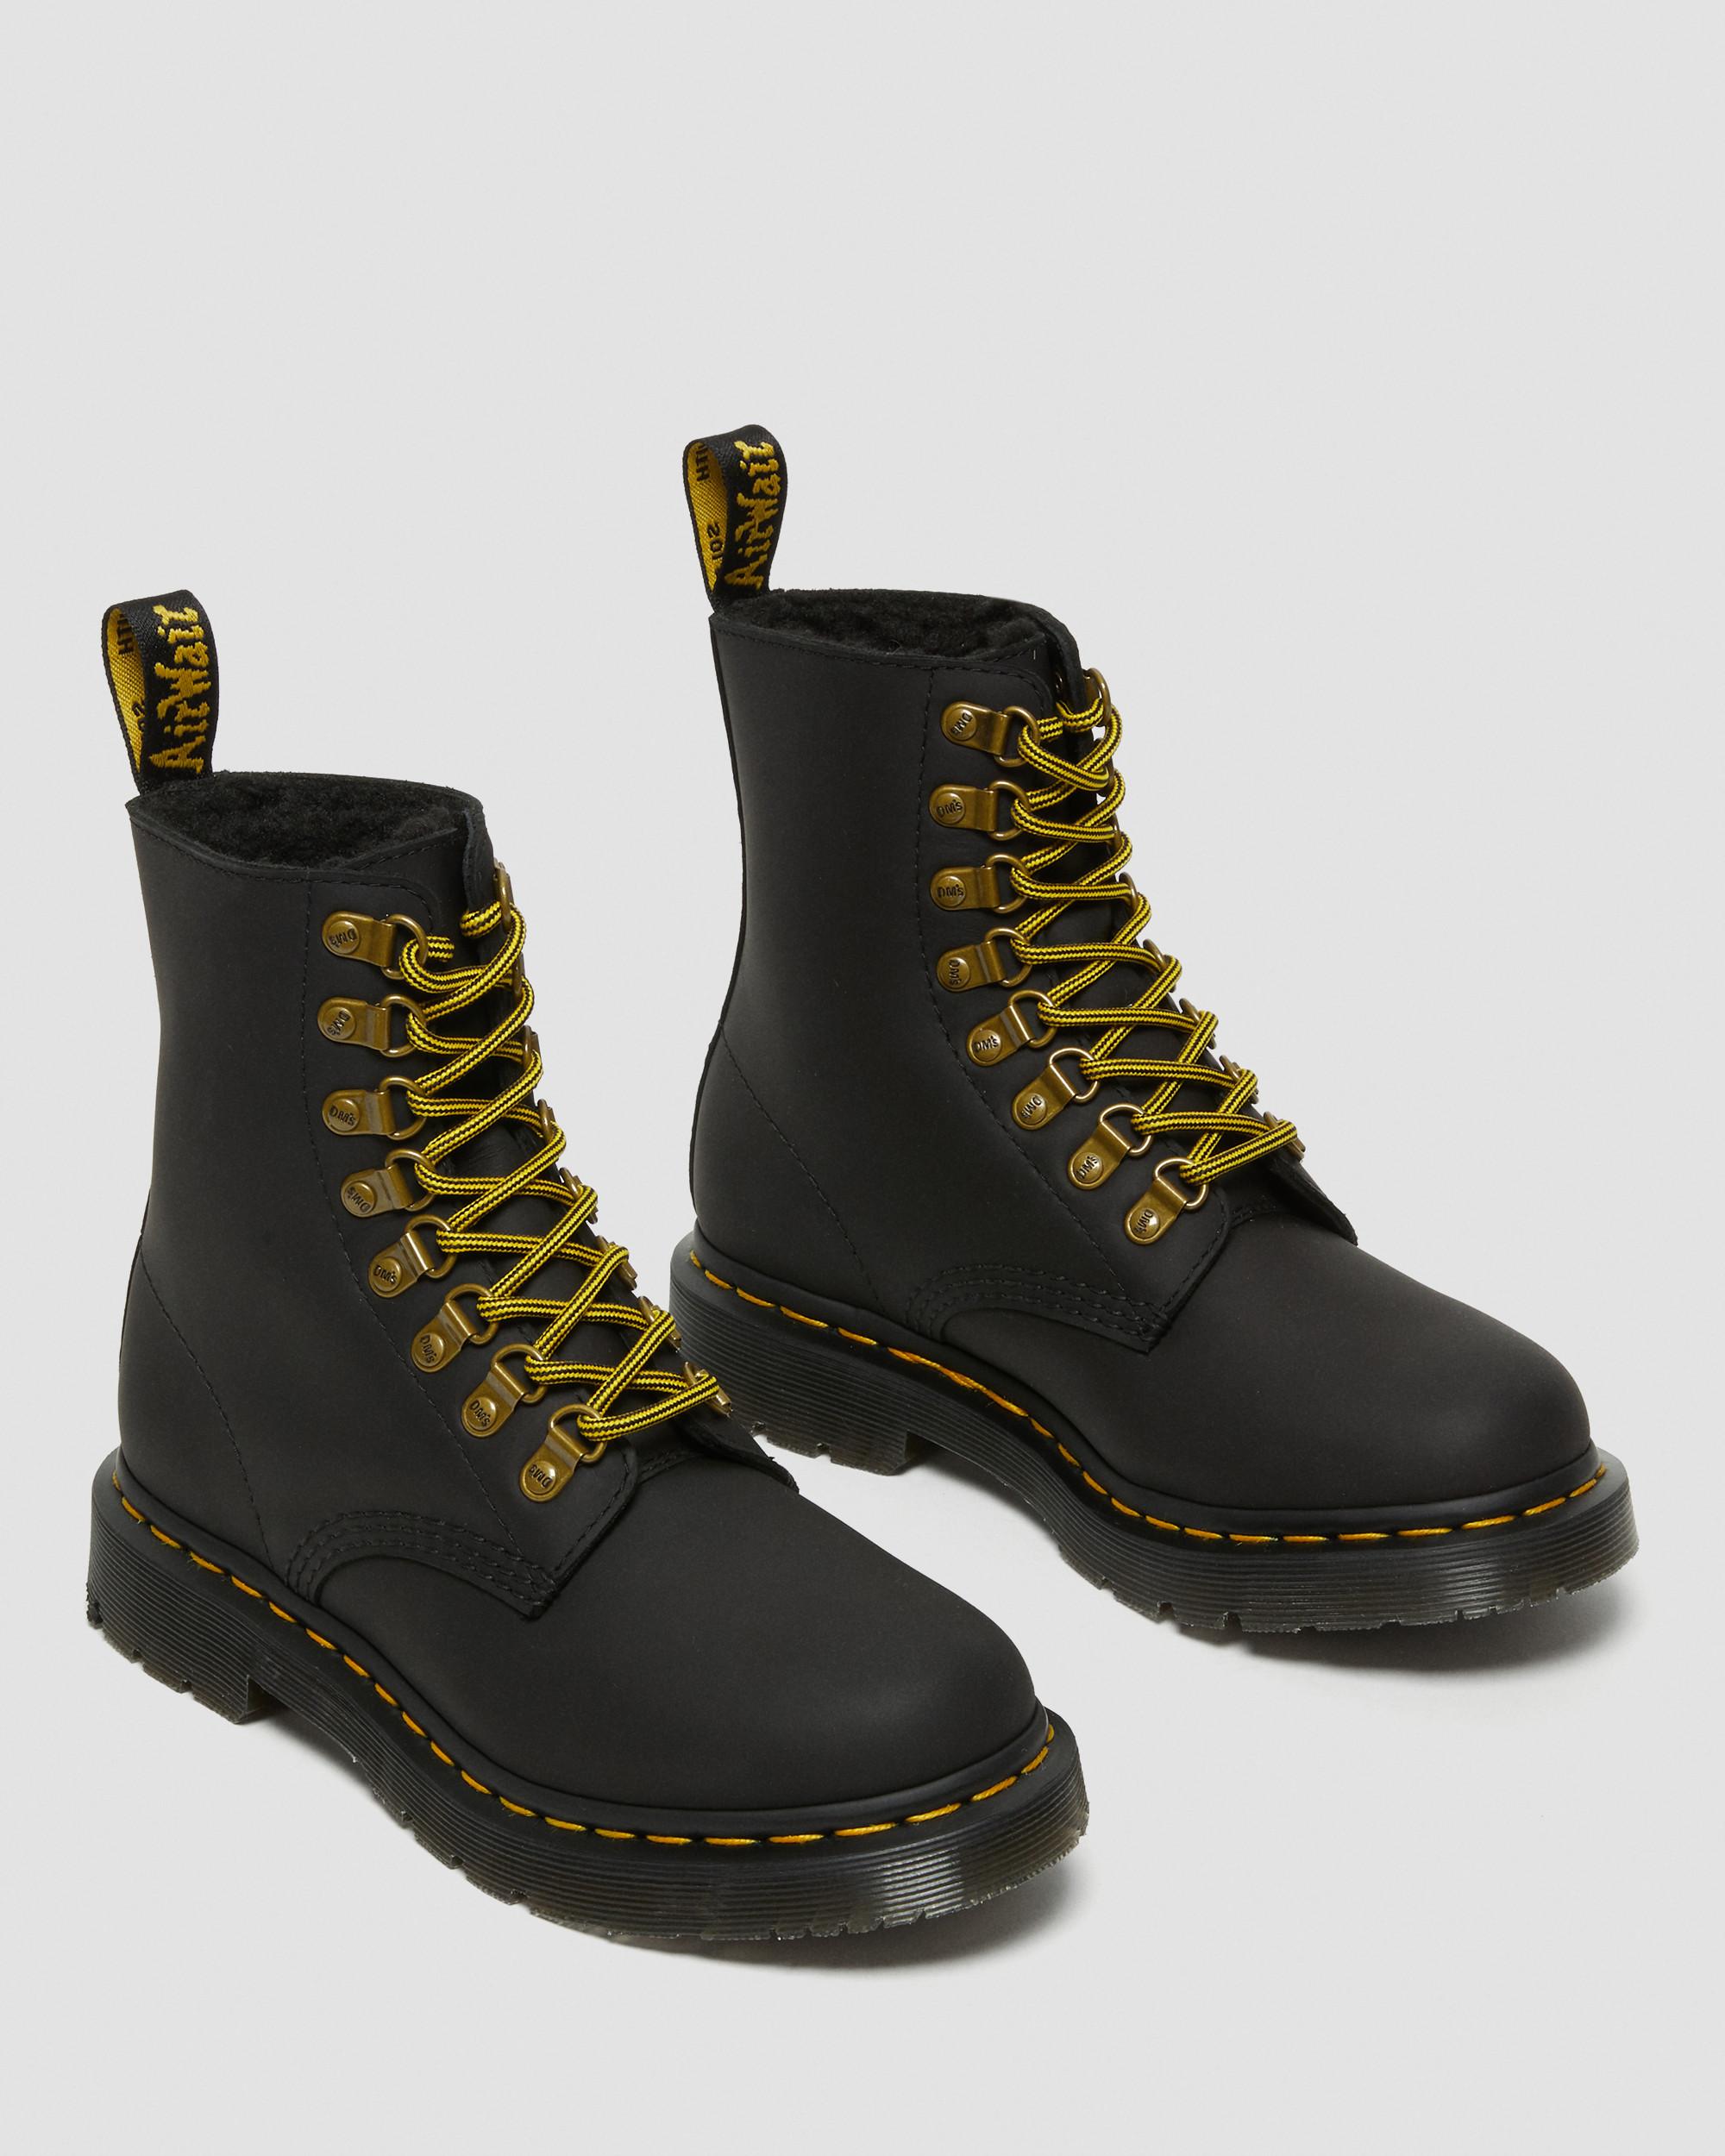 https://i1.adis.ws/i/drmartens/27007001.88.jpg?$large$1460 Pascal DM's Wintergrip Leather Lace Up Boots Dr. Martens